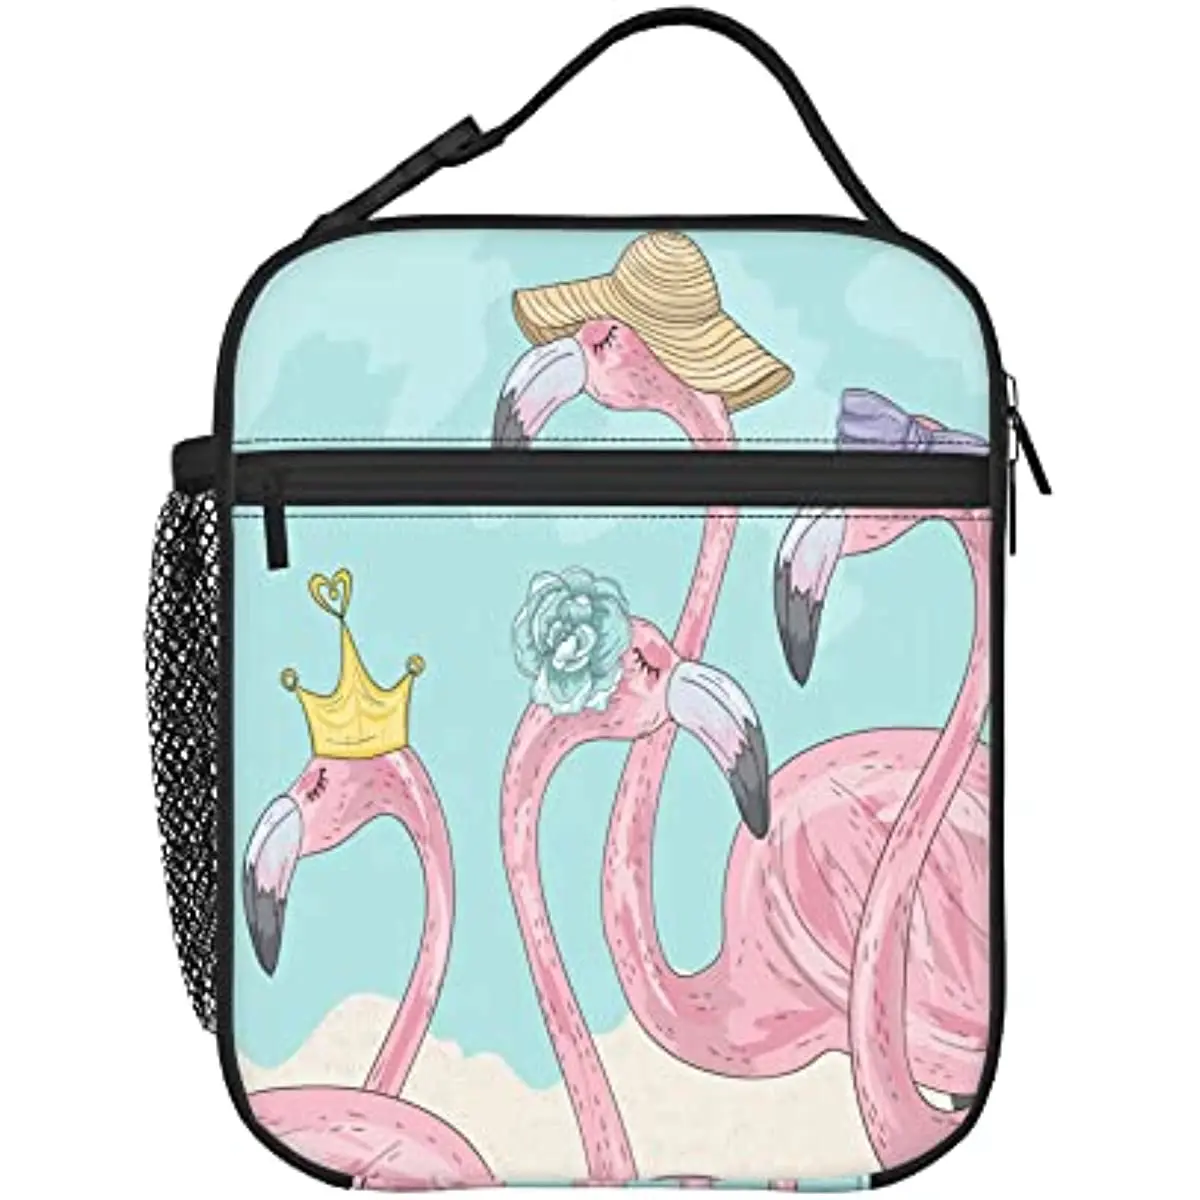 

Cute Tropical Flamingos Summer Lunch Box Insulated Lunch Bag Reusable Meal Lunch Tote Bag Cooler Bag Container Waterproof